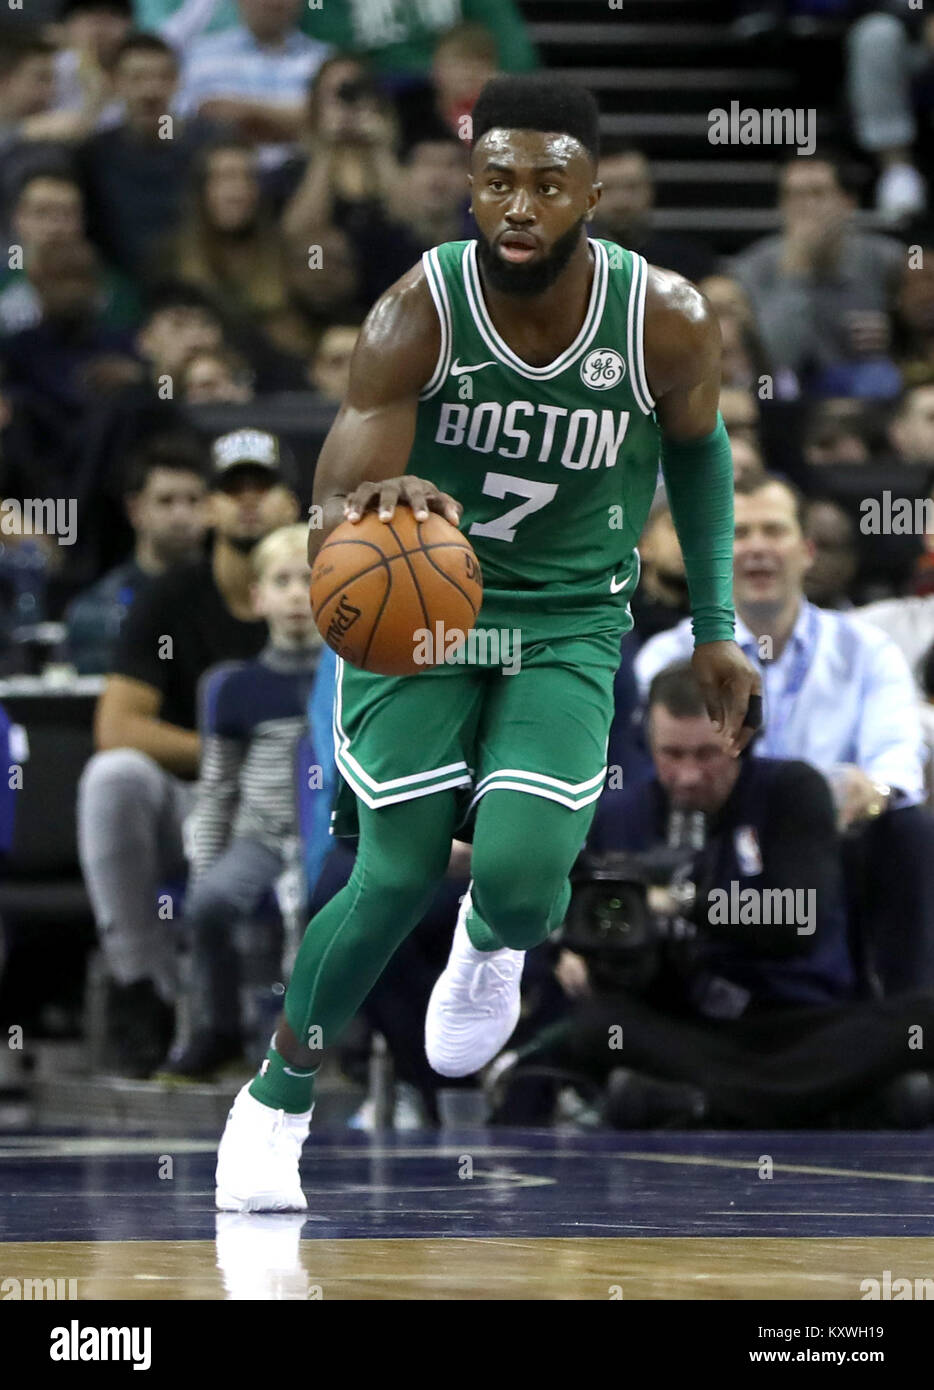 Boston Celtics' Jaylen Brown during the NBA London Game 2018 at the O2 Arena, London. PRESS ASSOCIATION Photo. Picture date: Thursday January 11, 2018. See PA story BASKETBALL London. Photo credit should read: Simon Cooper/PA Wire. Stock Photo